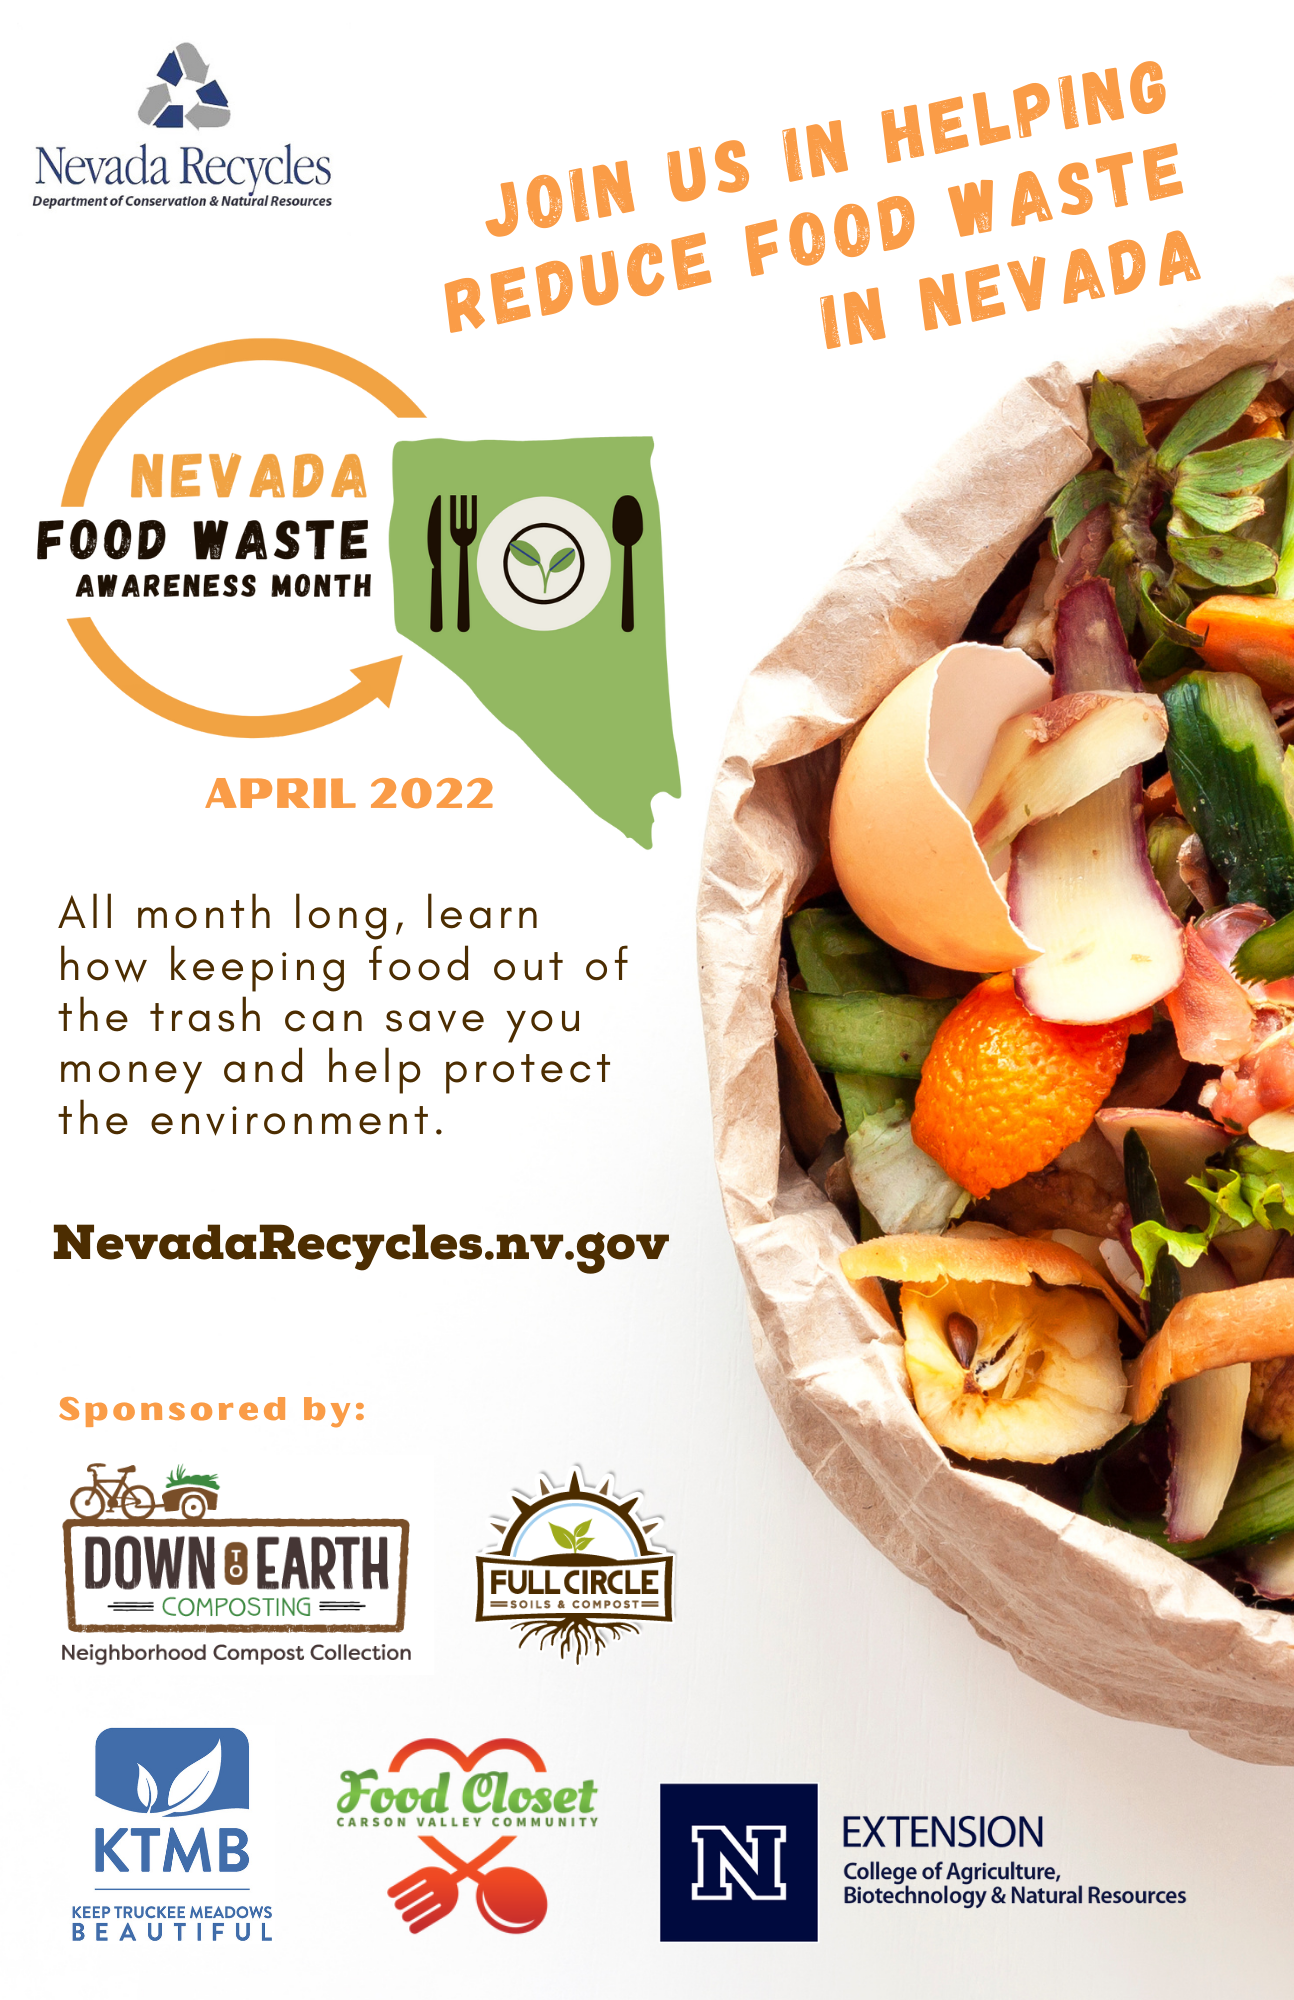 Flyer for Nevada Food Waste Awareness Month for April 2022. Sign up on Nevada Recycles website